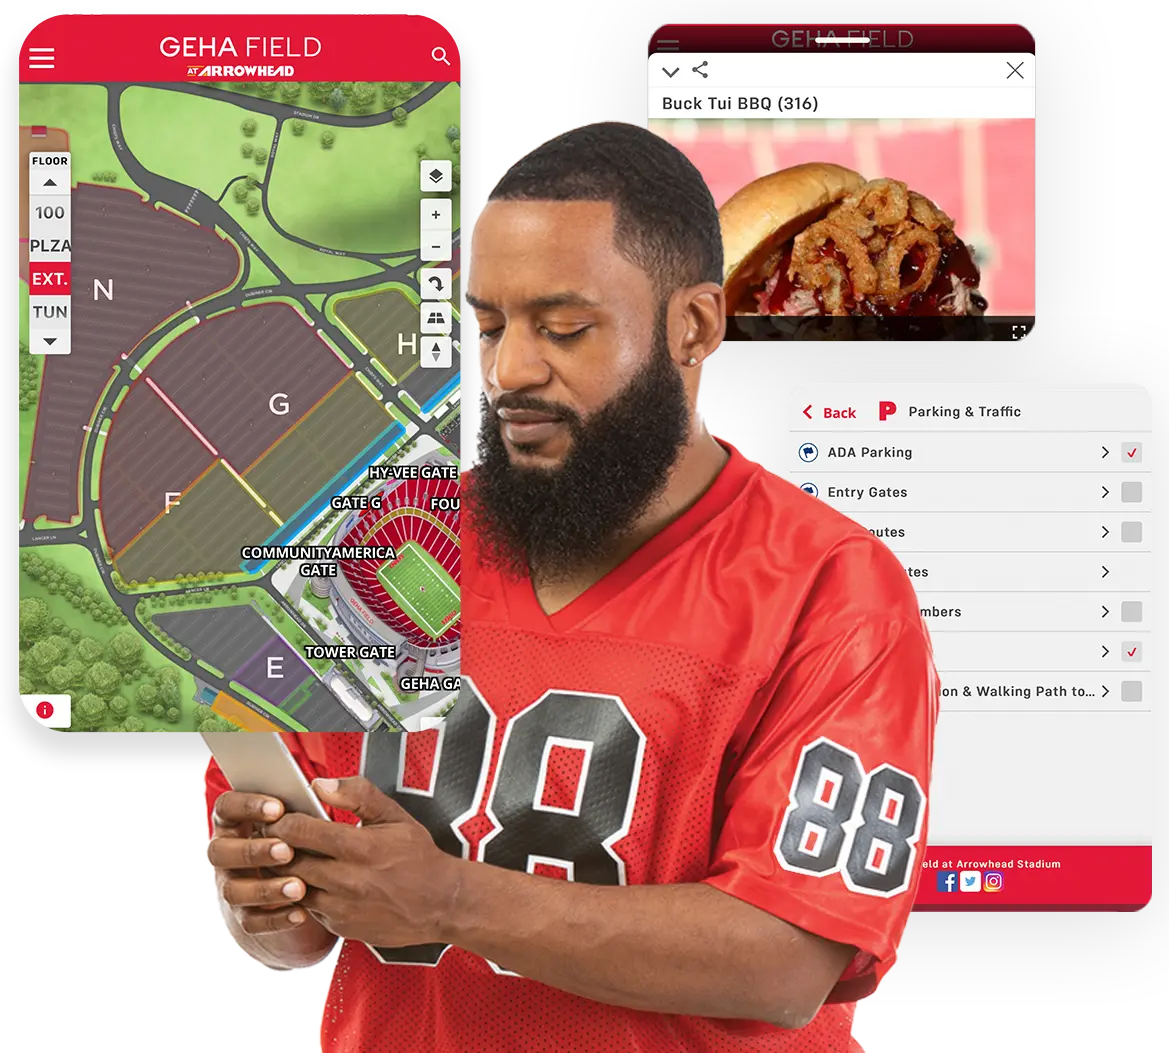 Guy in a red jersey looking at phone. Surrounding him is 3 screenshots of an interactive map. The screenshot on his left is of the parking lot, the screenshot above and to the right of him is an image of a food truck sandwhich, and the screenshot to the right of him is of the categories on the map.